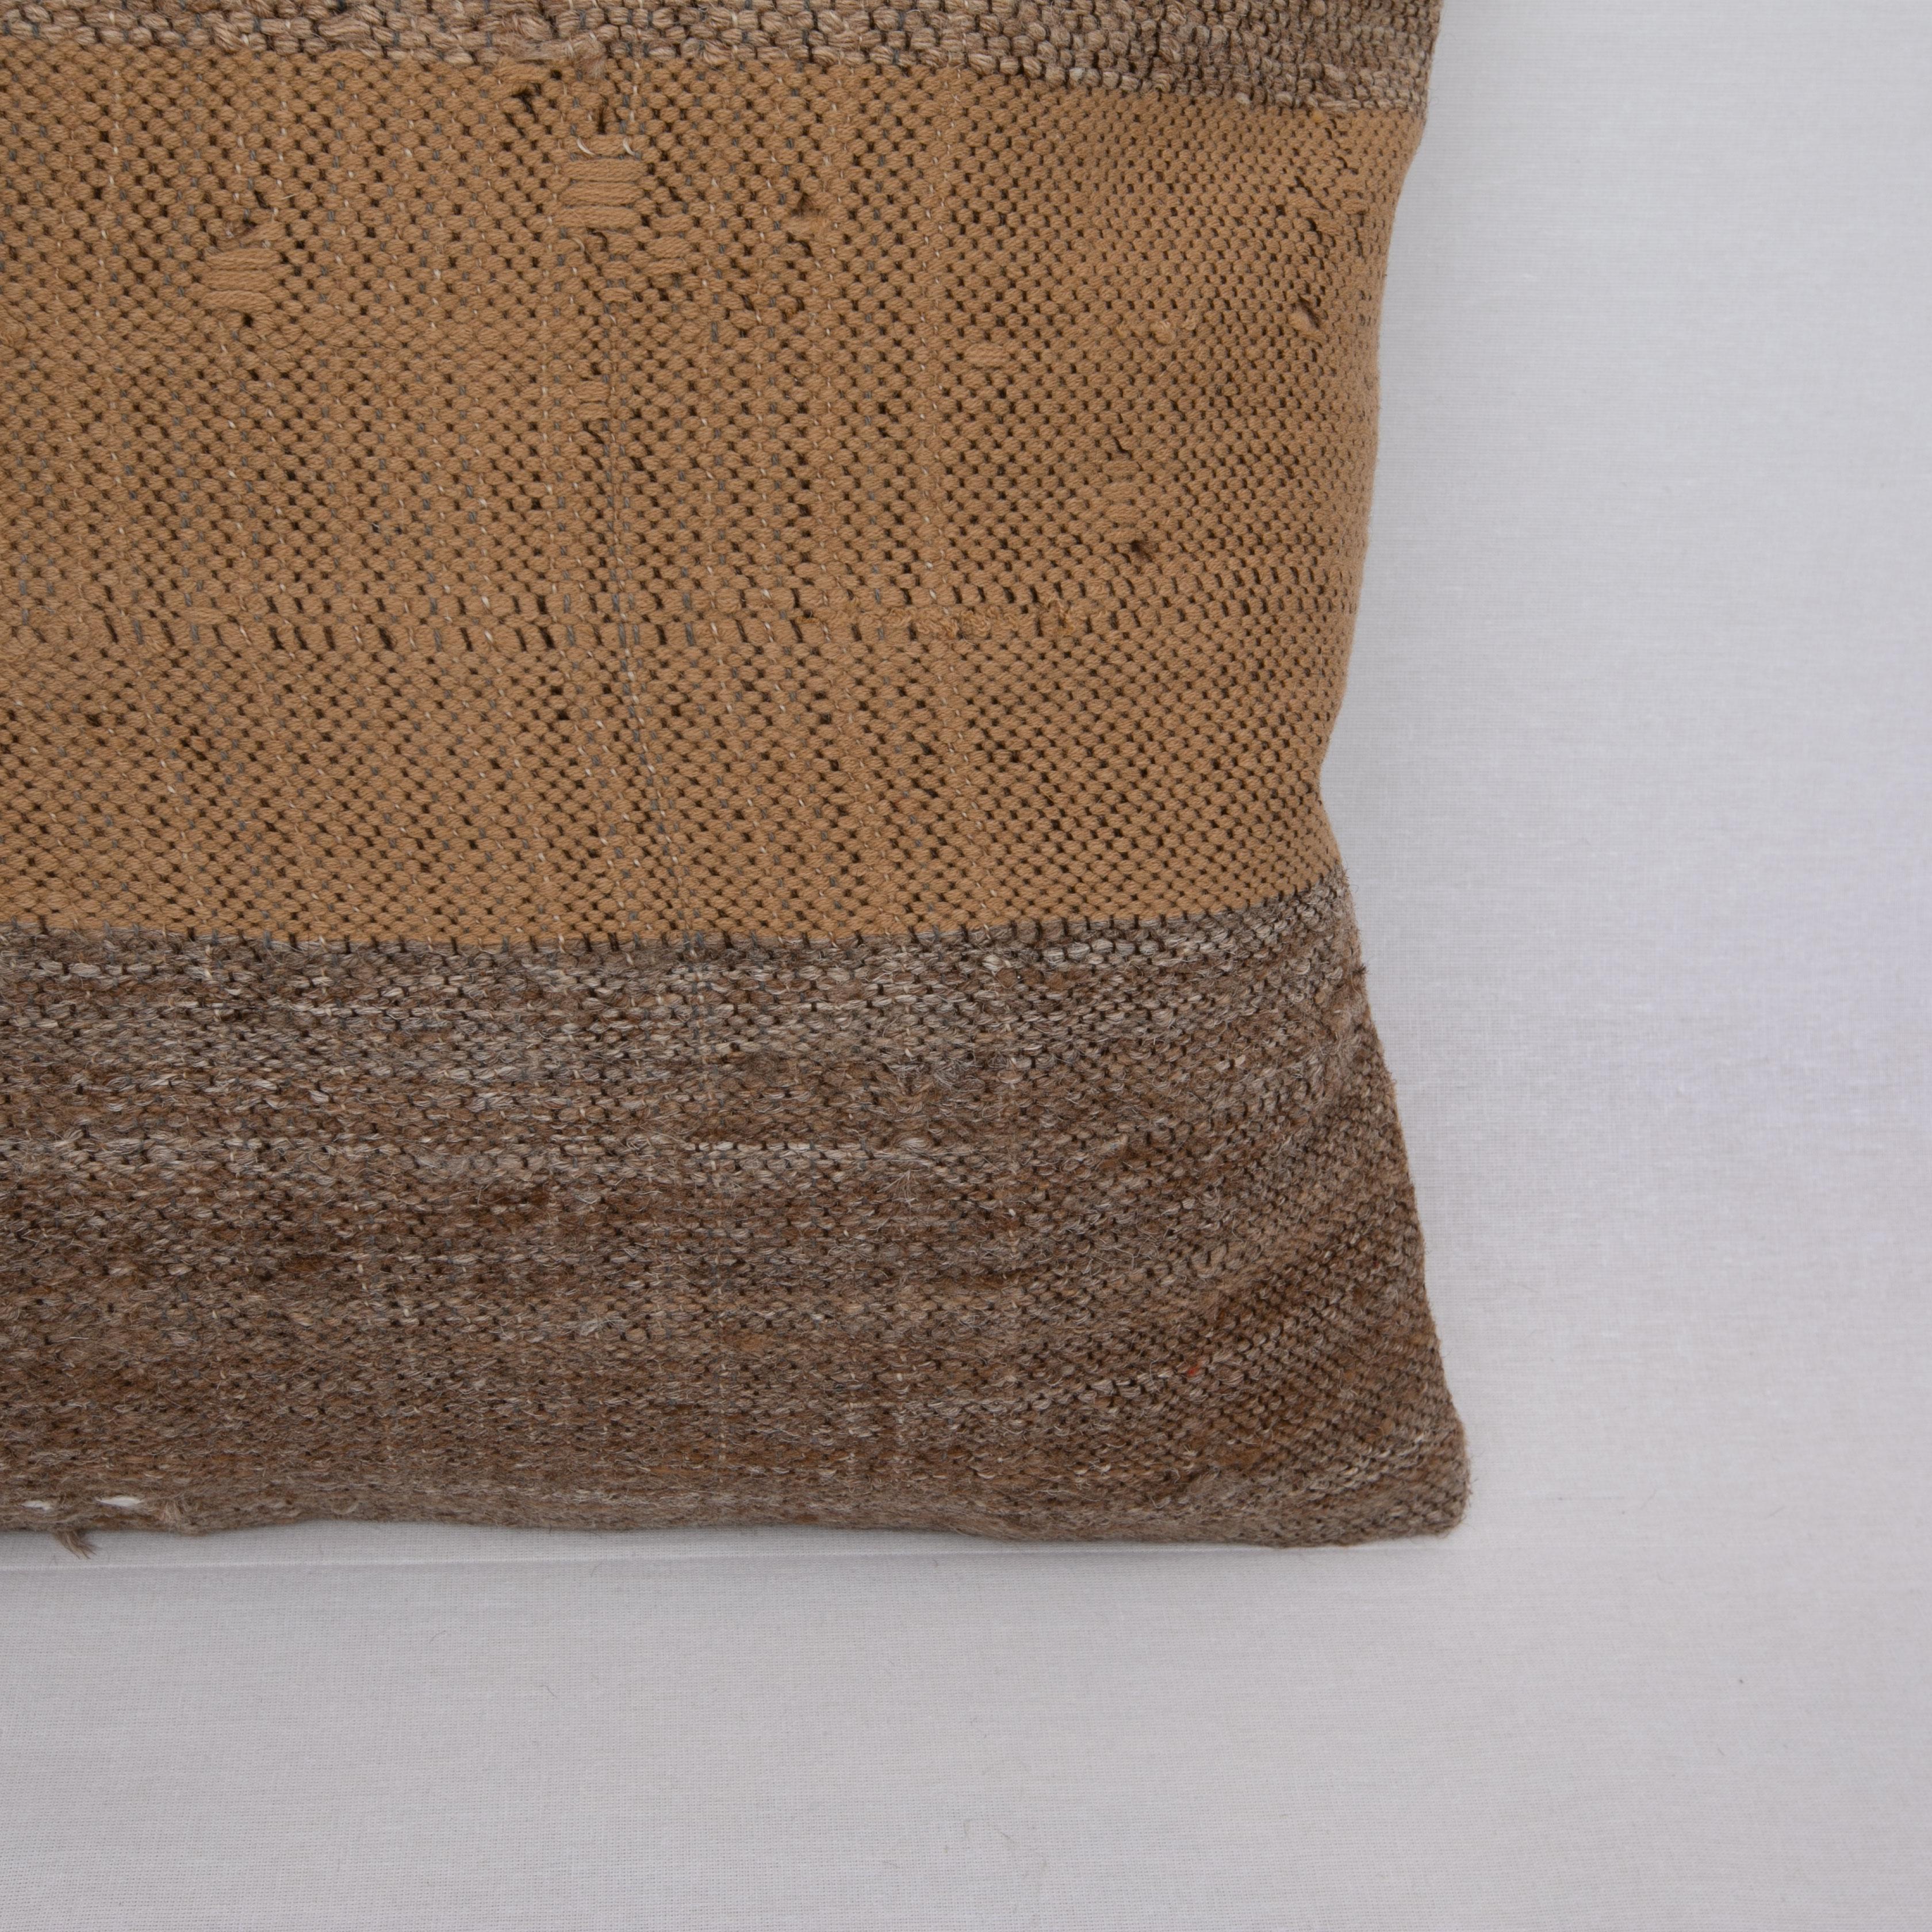 Hand-Woven Rustic Pillow Case Made from a Vintage Un-Dyed Wool Coverlet, Mid 20th C. For Sale